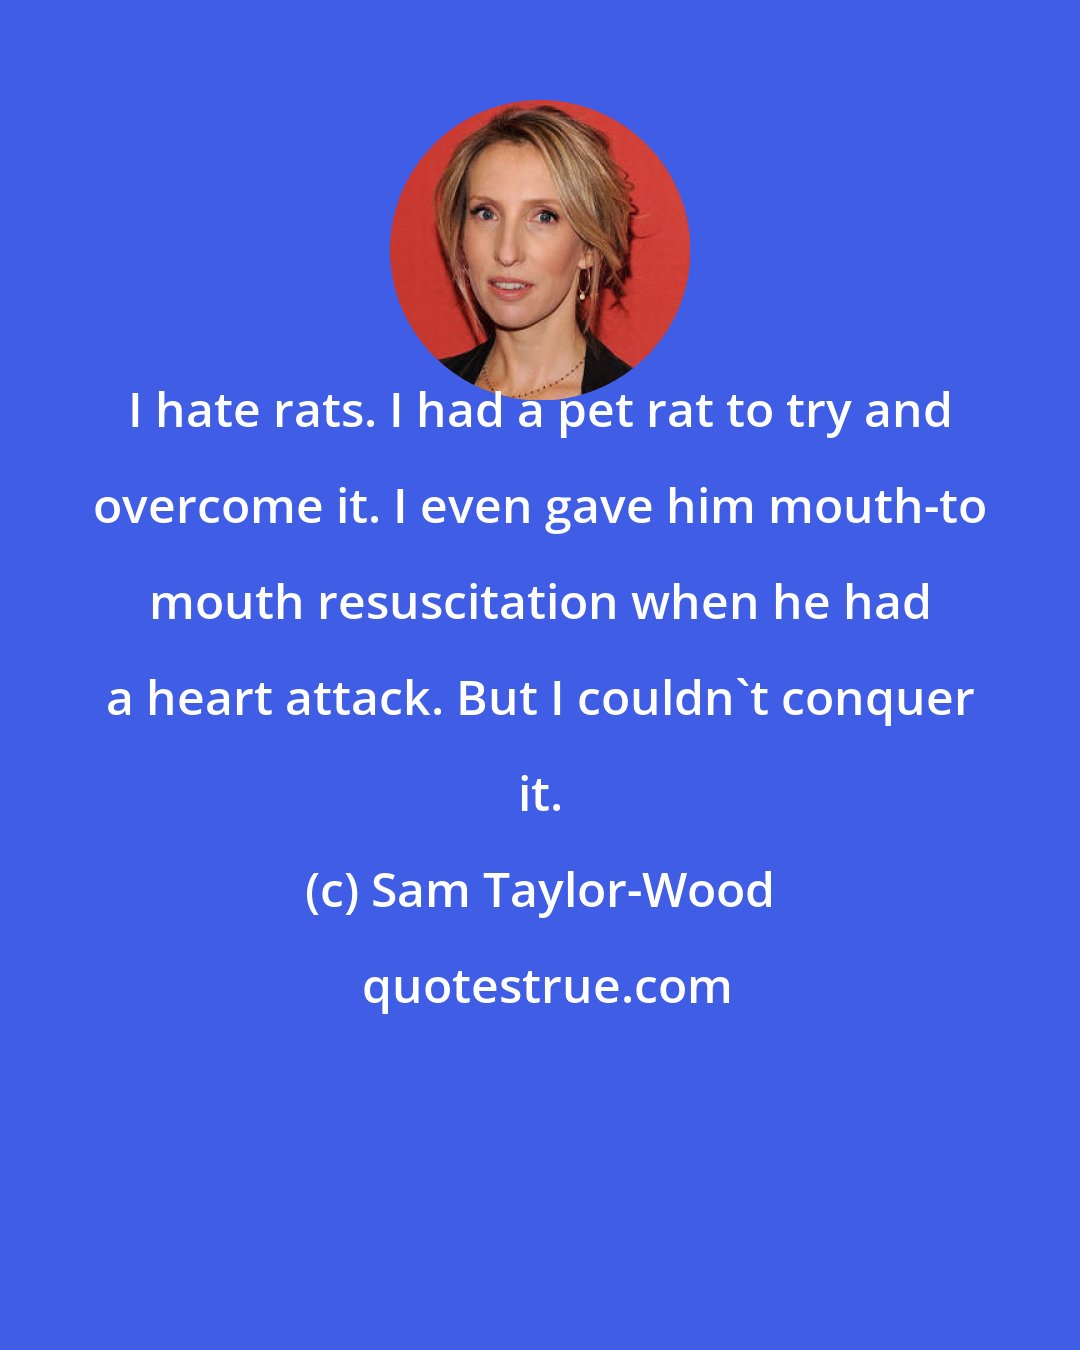 Sam Taylor-Wood: I hate rats. I had a pet rat to try and overcome it. I even gave him mouth-to mouth resuscitation when he had a heart attack. But I couldn't conquer it.